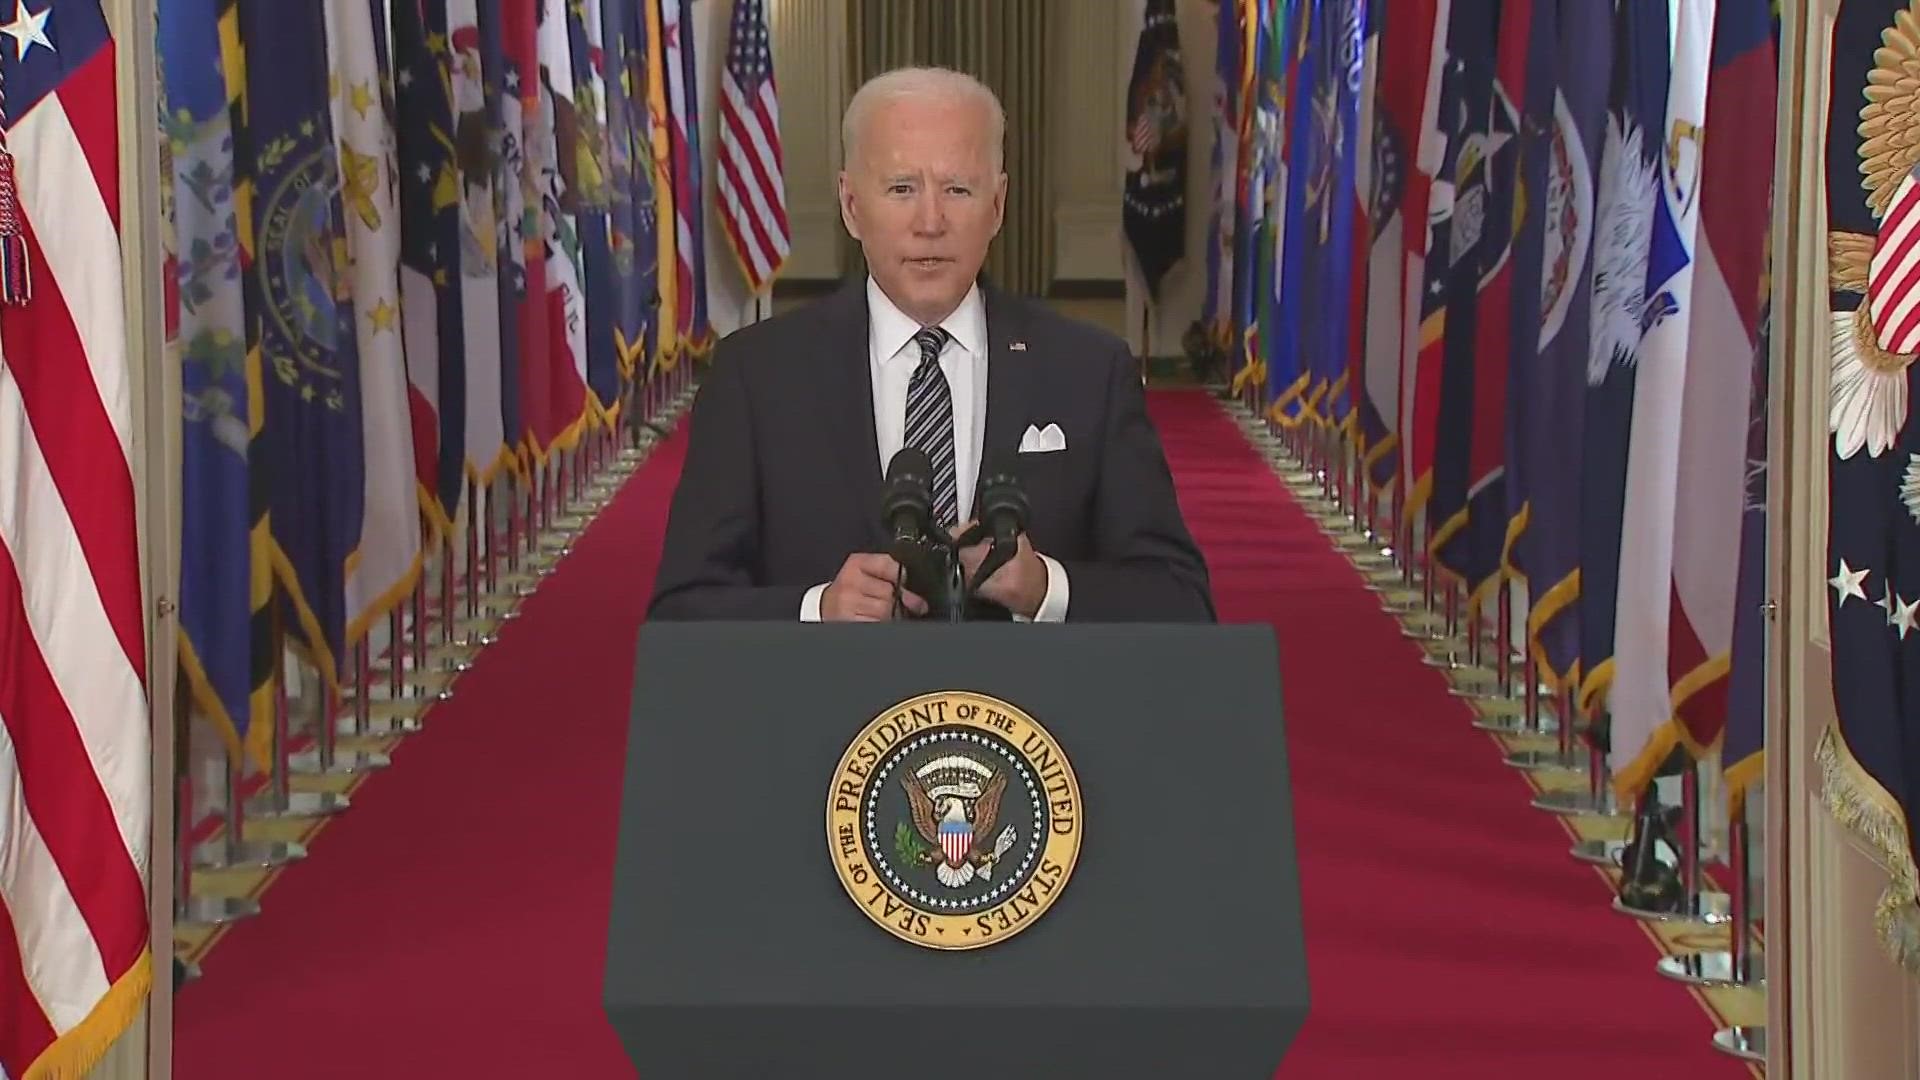 President Joe Biden delivered a somber but optimistic message from the White House on the one-year anniversary of the coronavirus pandemic.